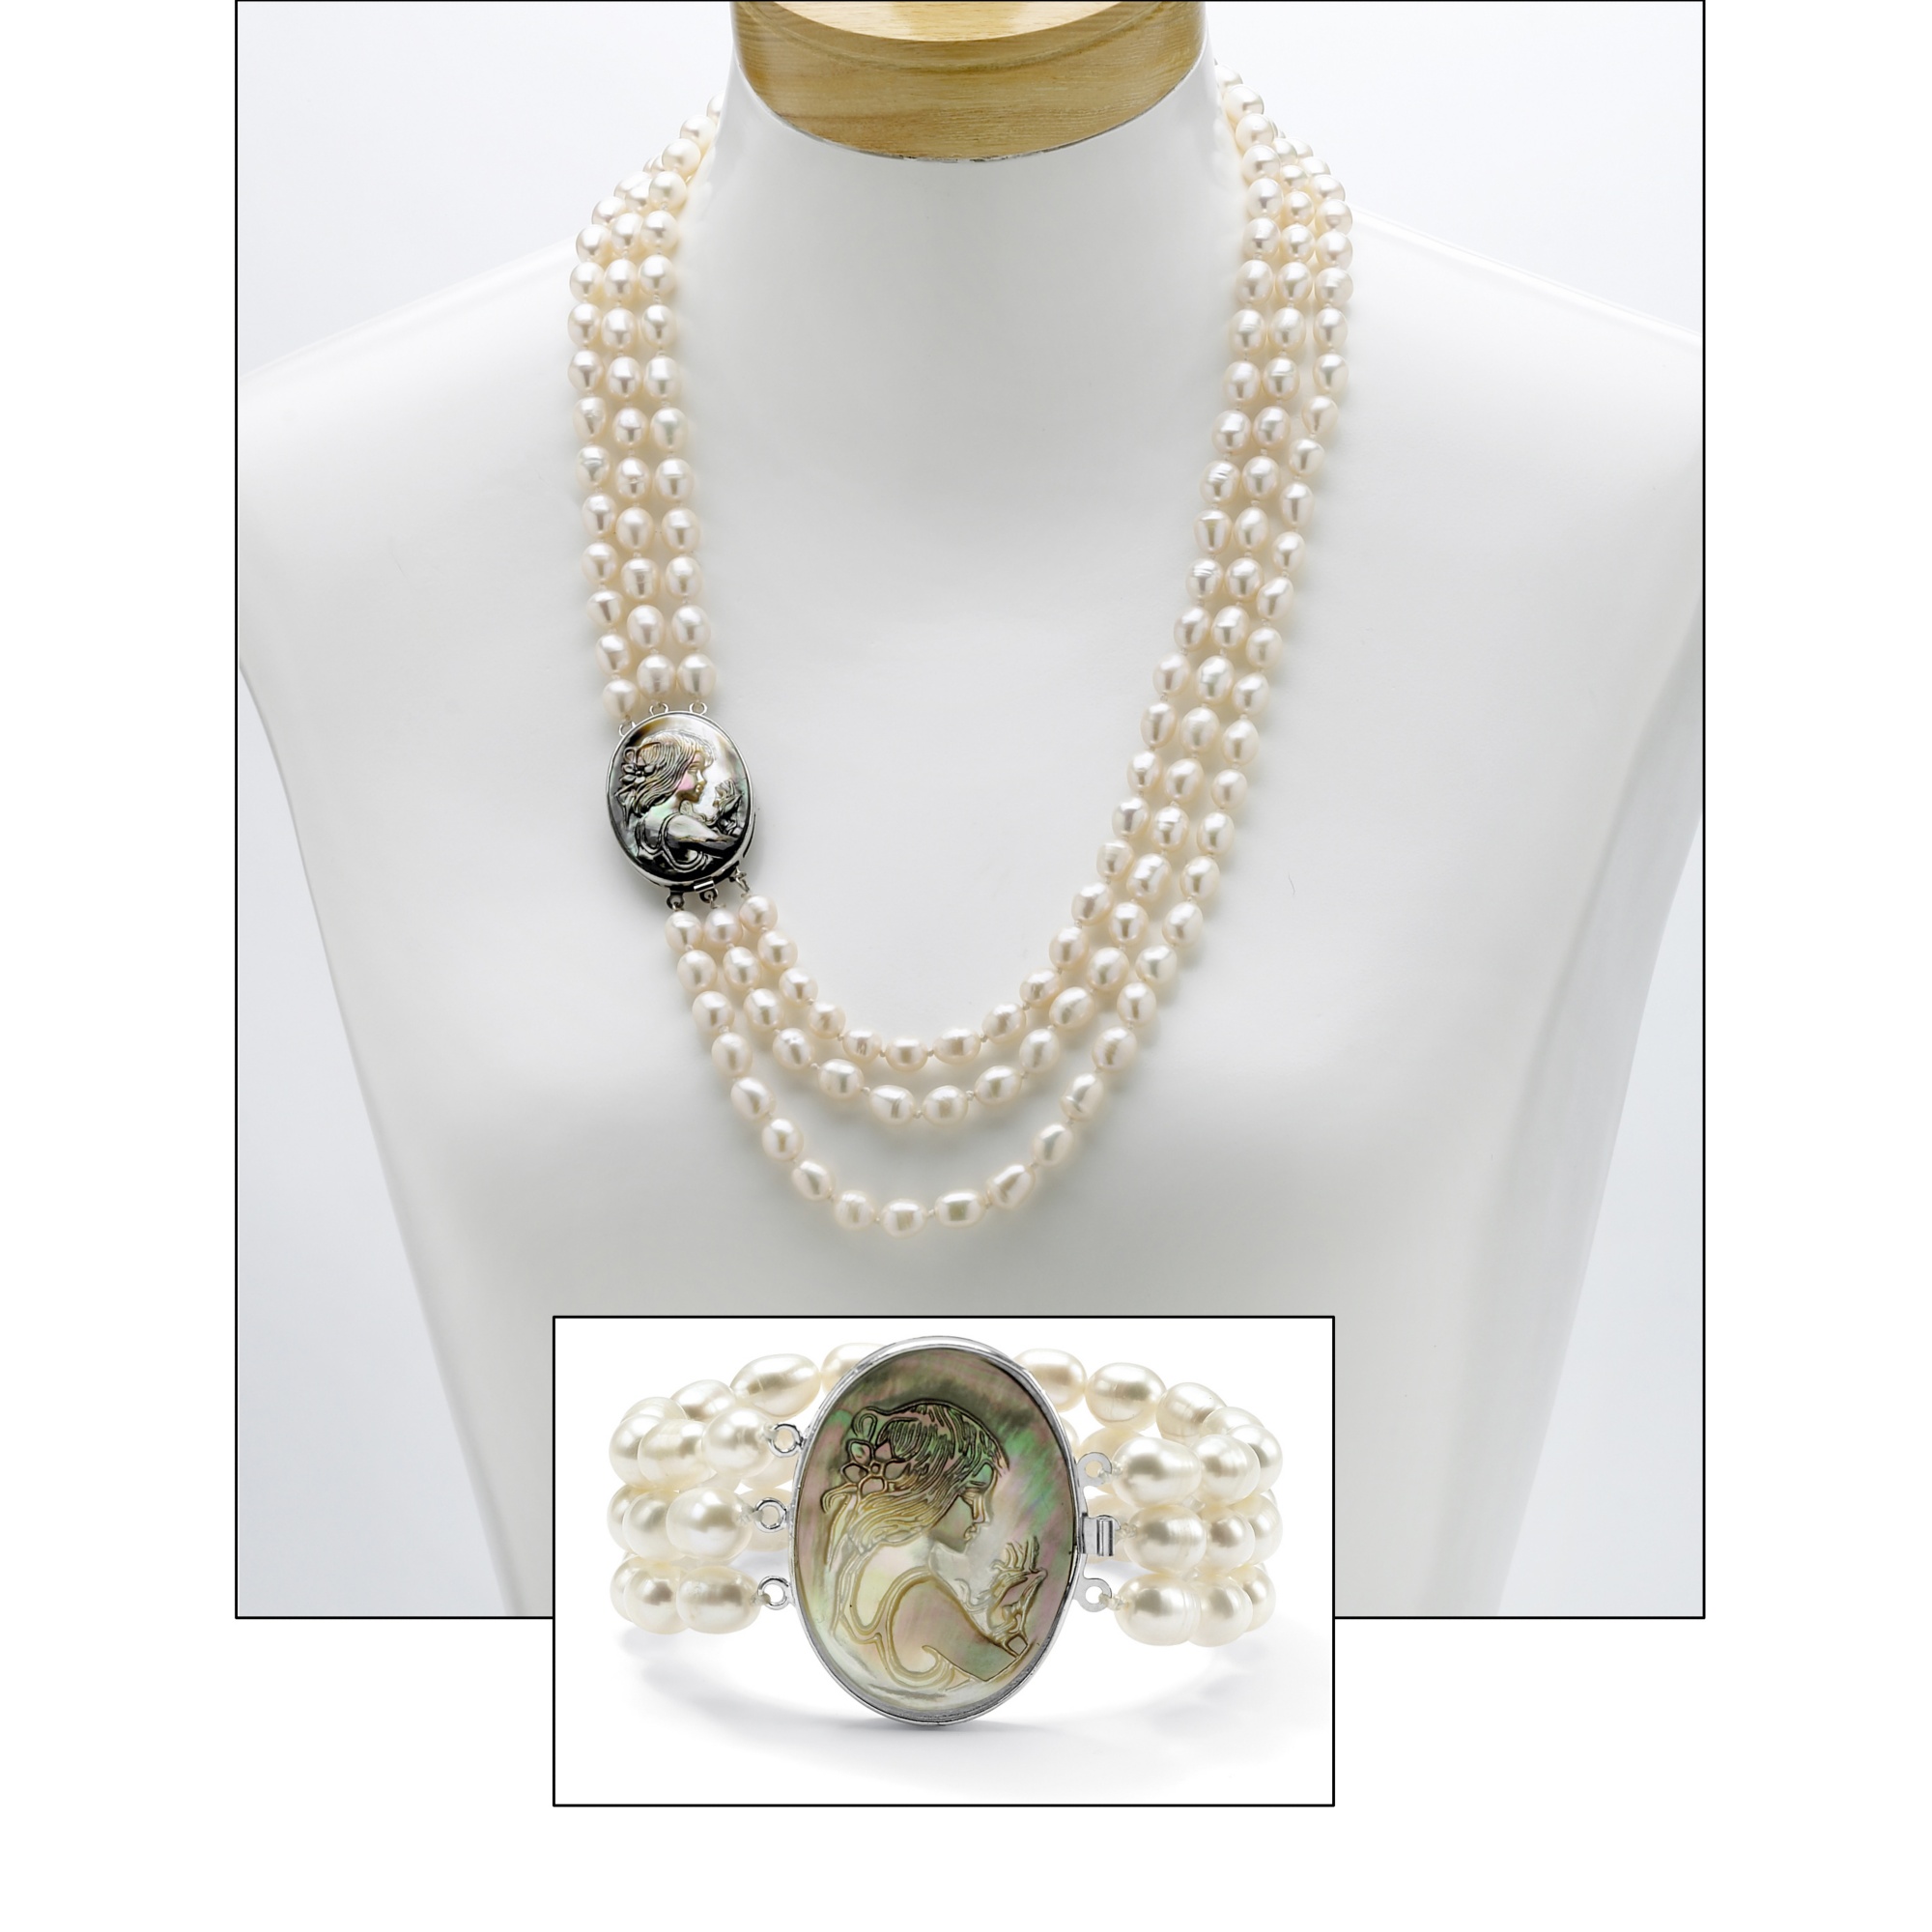 Cultured Freshwater Pearl and Black Mother-of-Pearl Cameo Triple-Strand Necklace and Bracelet Set in Silvertone